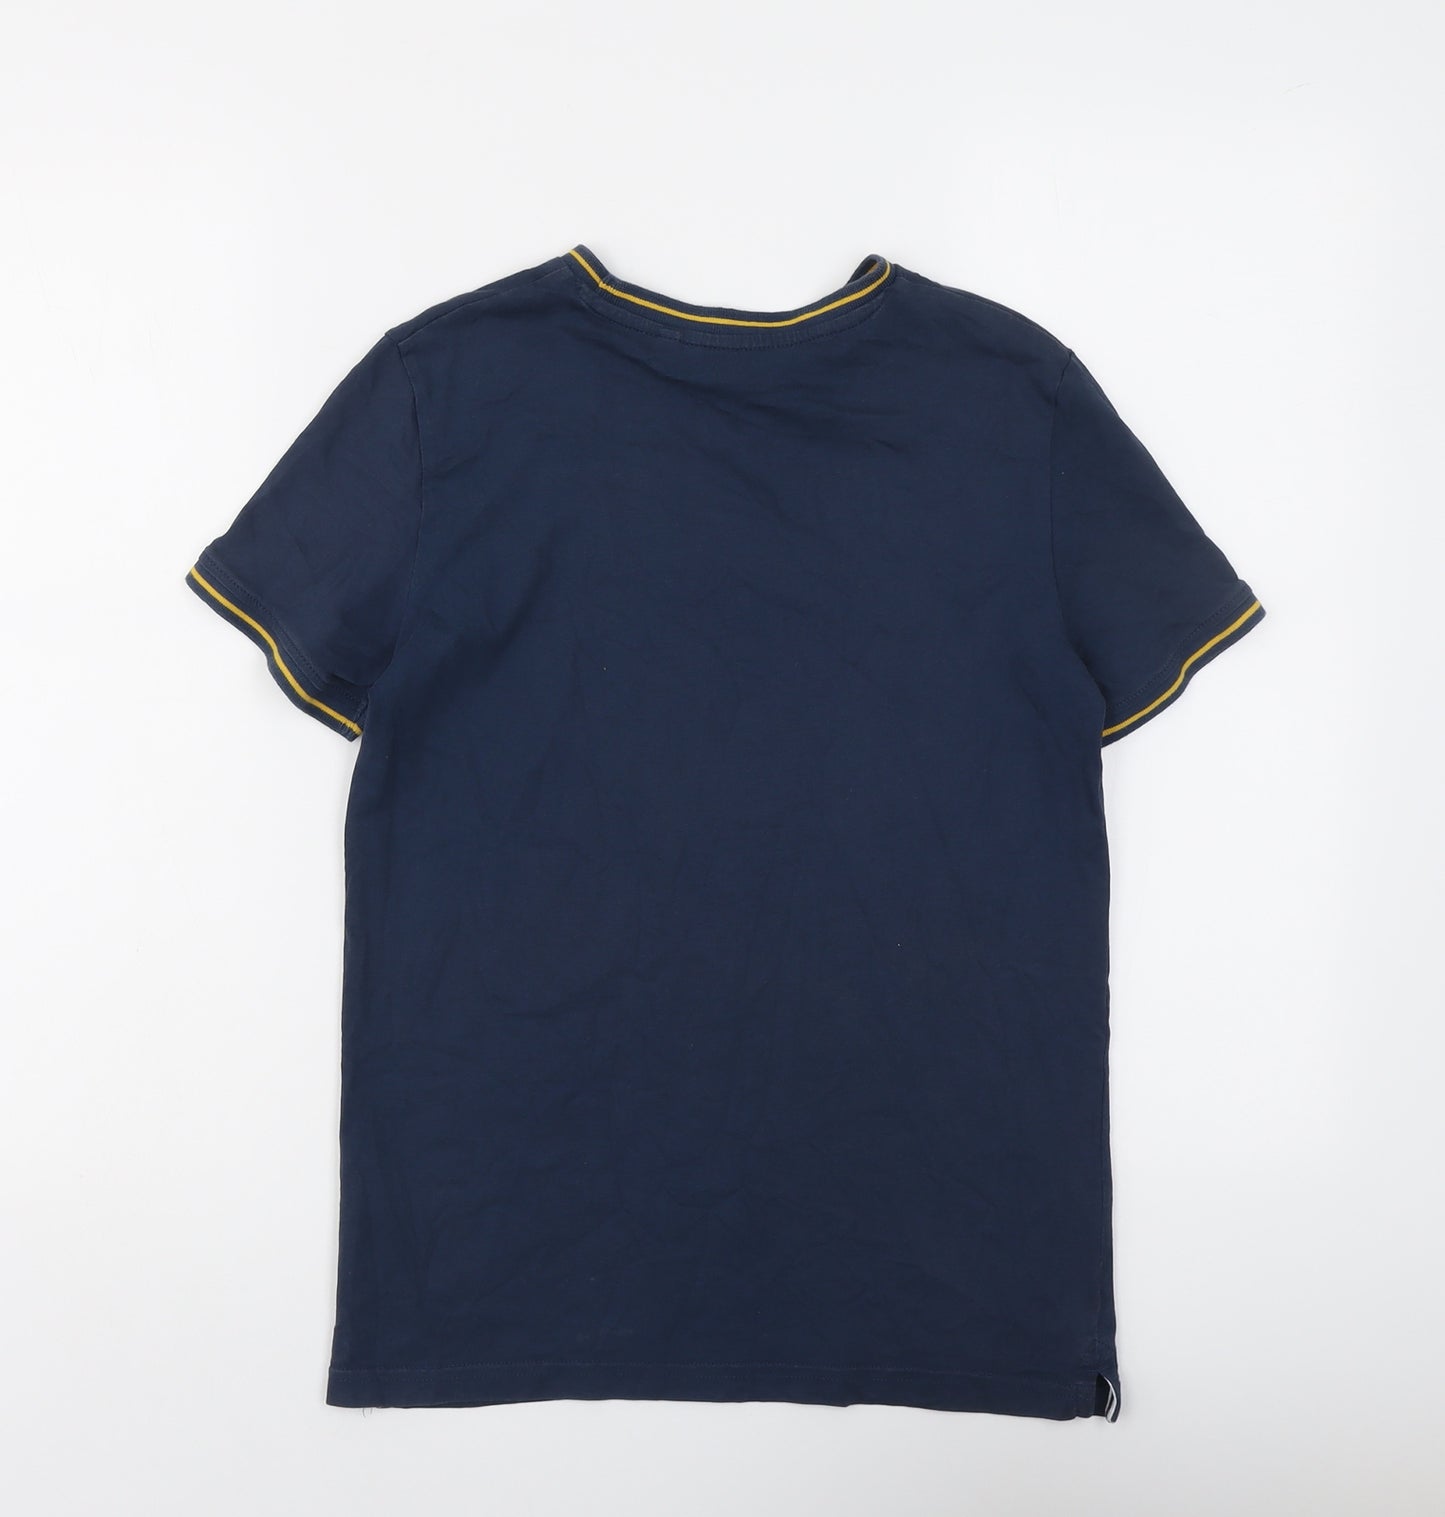 NEXT Boys Blue Cotton Basic T-Shirt Size 11 Years Round Neck Pullover